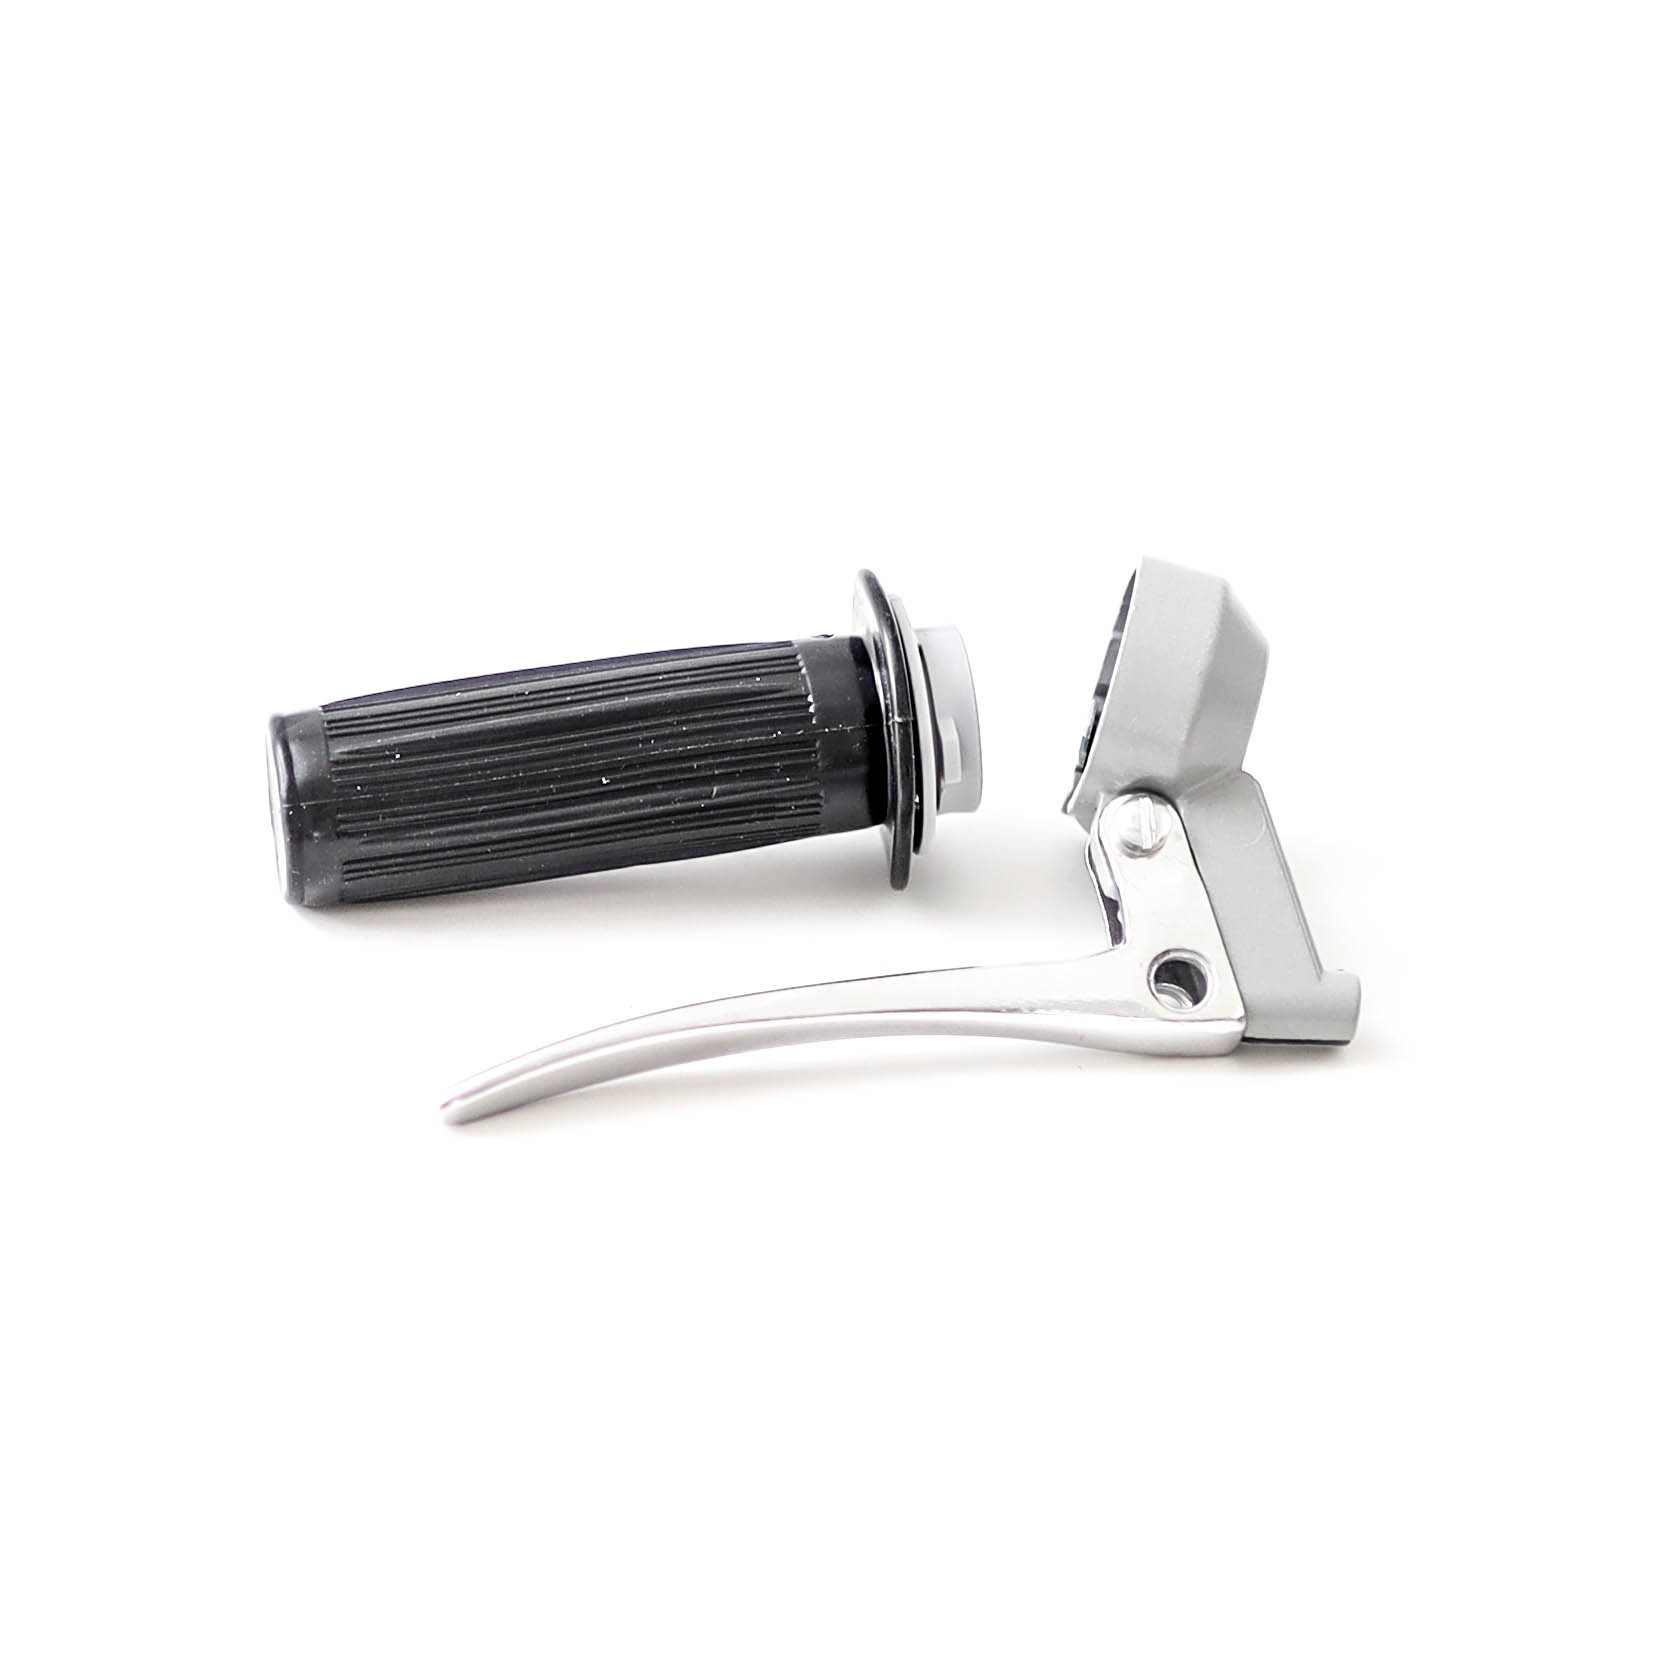 PUCH Throttle Handle. Compl. Gray